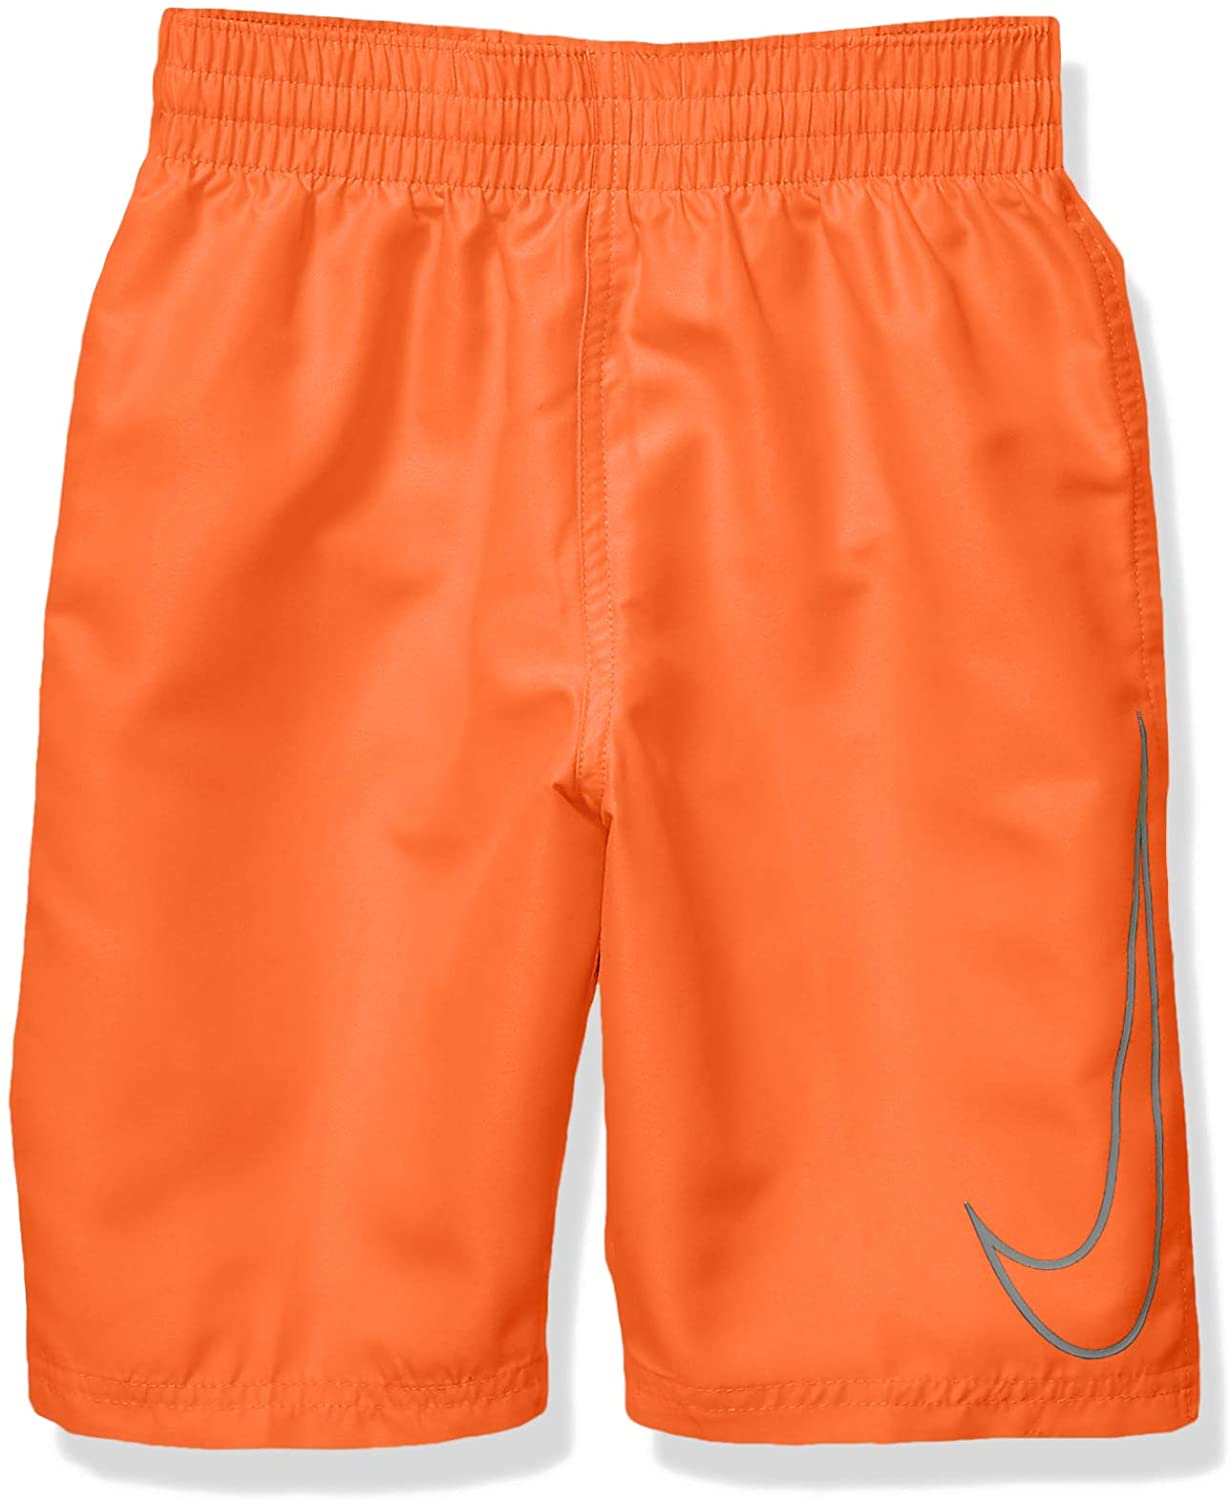 Boy's Nike Big Swoosh Solid Lap Volley Short Swim Trunk in Total Orange color from the front